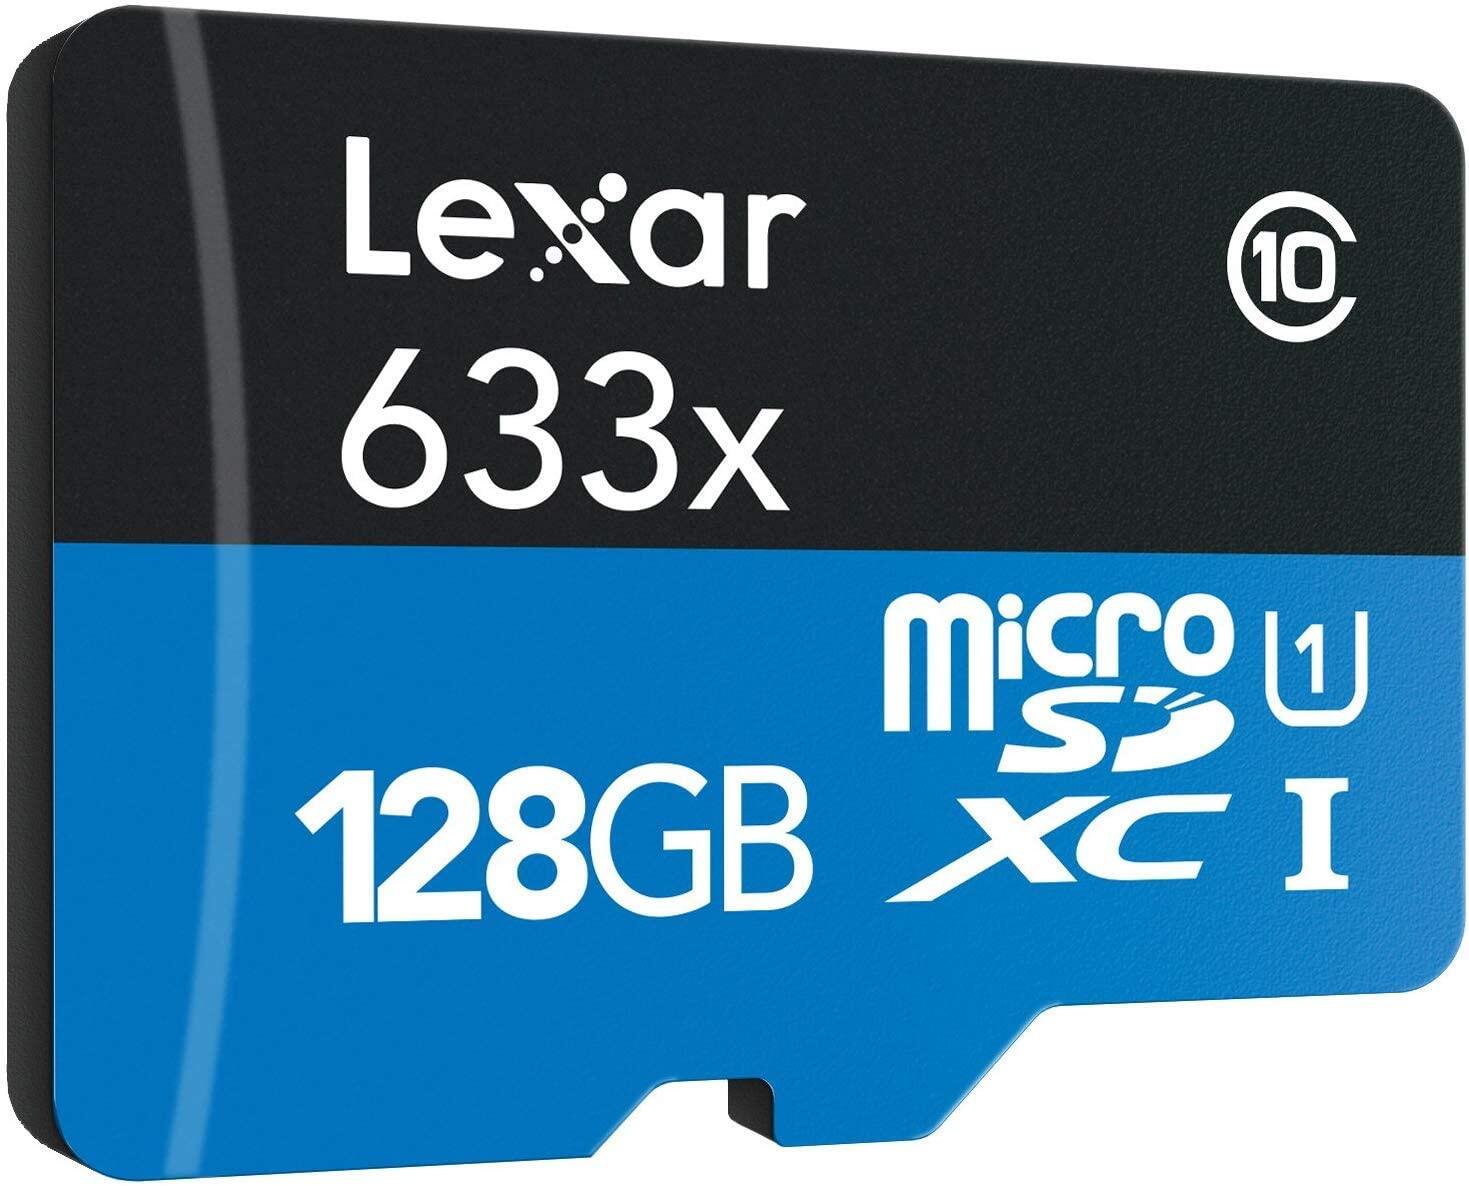 Lexar 128GB High-Performance 633x microSDHC/ microSDXC UHS-I Class 10 V10 A1 Memory Card with Adapter Read up to 100 MB/s